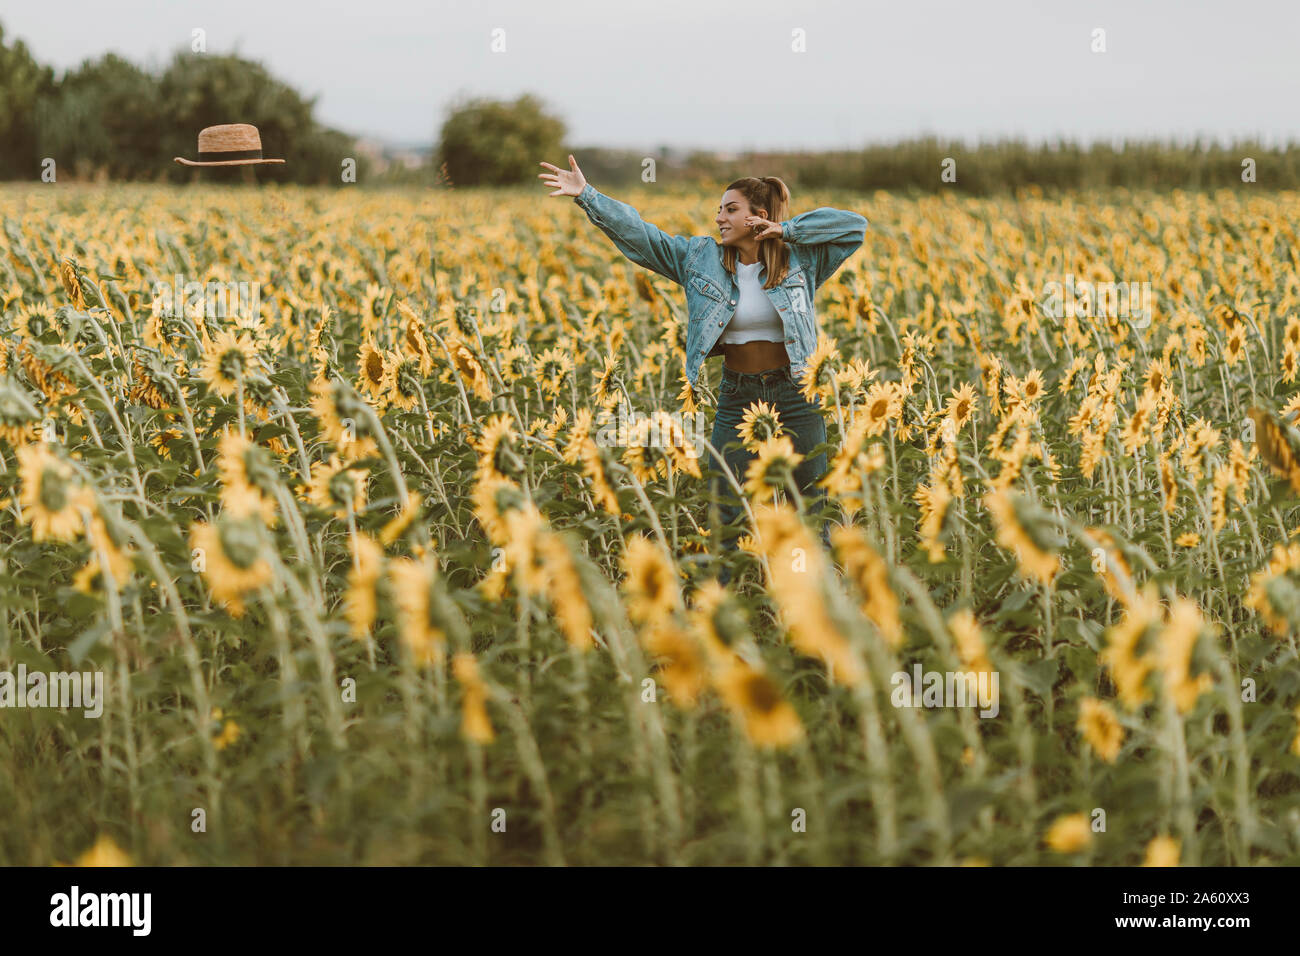 Young woman with blue denim jacket throwing a hat in a field of sunflowers Stock Photo